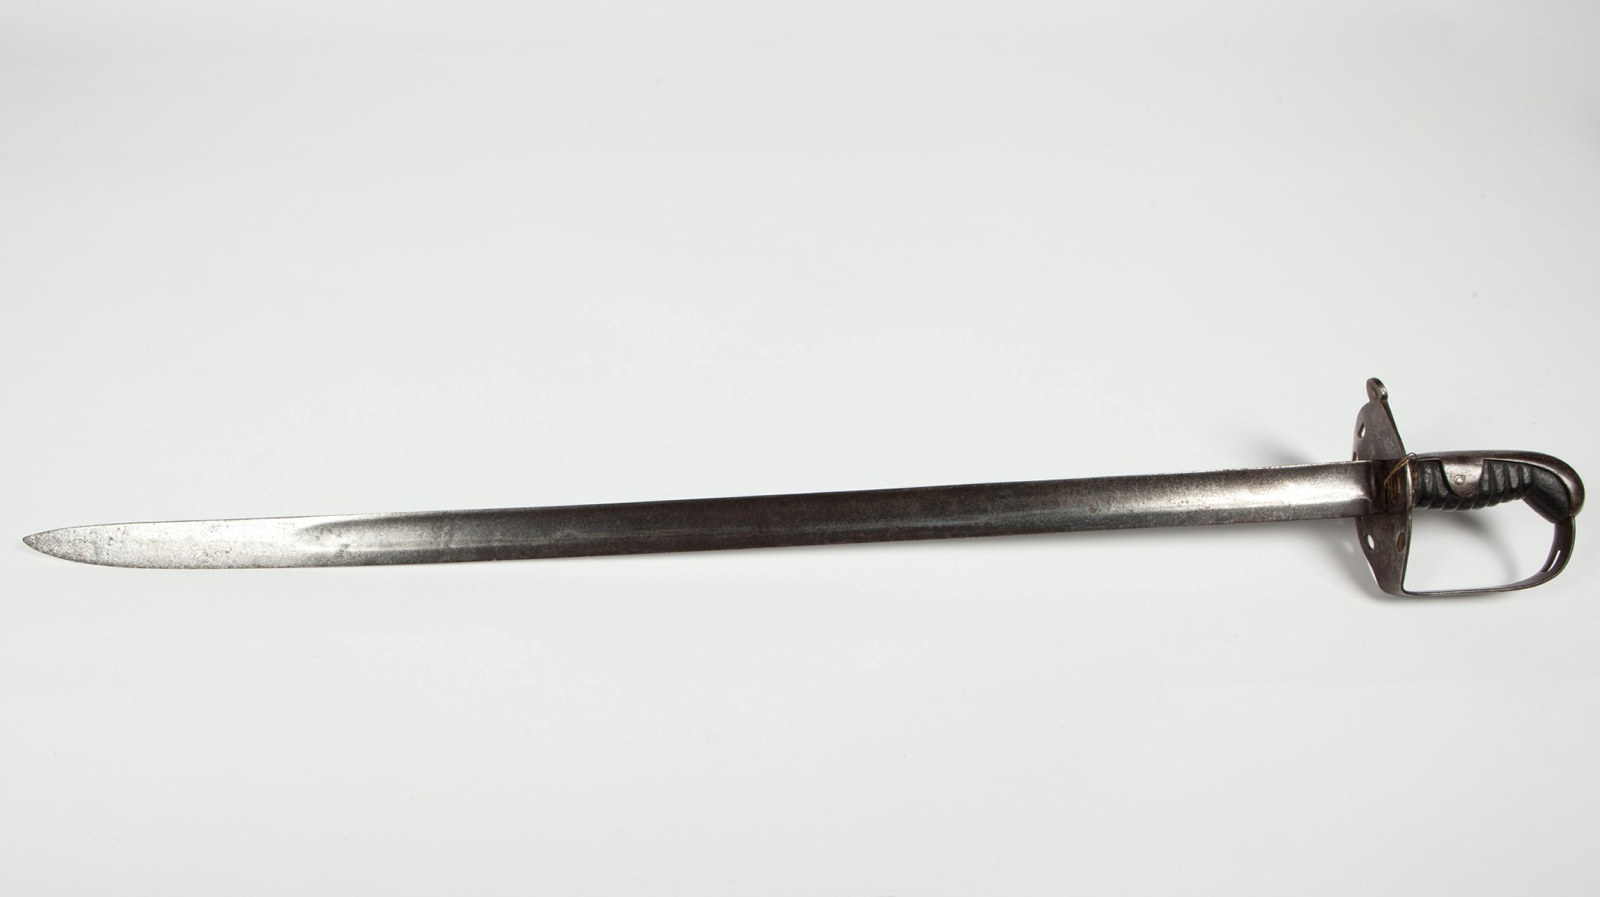 Sword similar to those issued to NSW mounted police during the gold rush